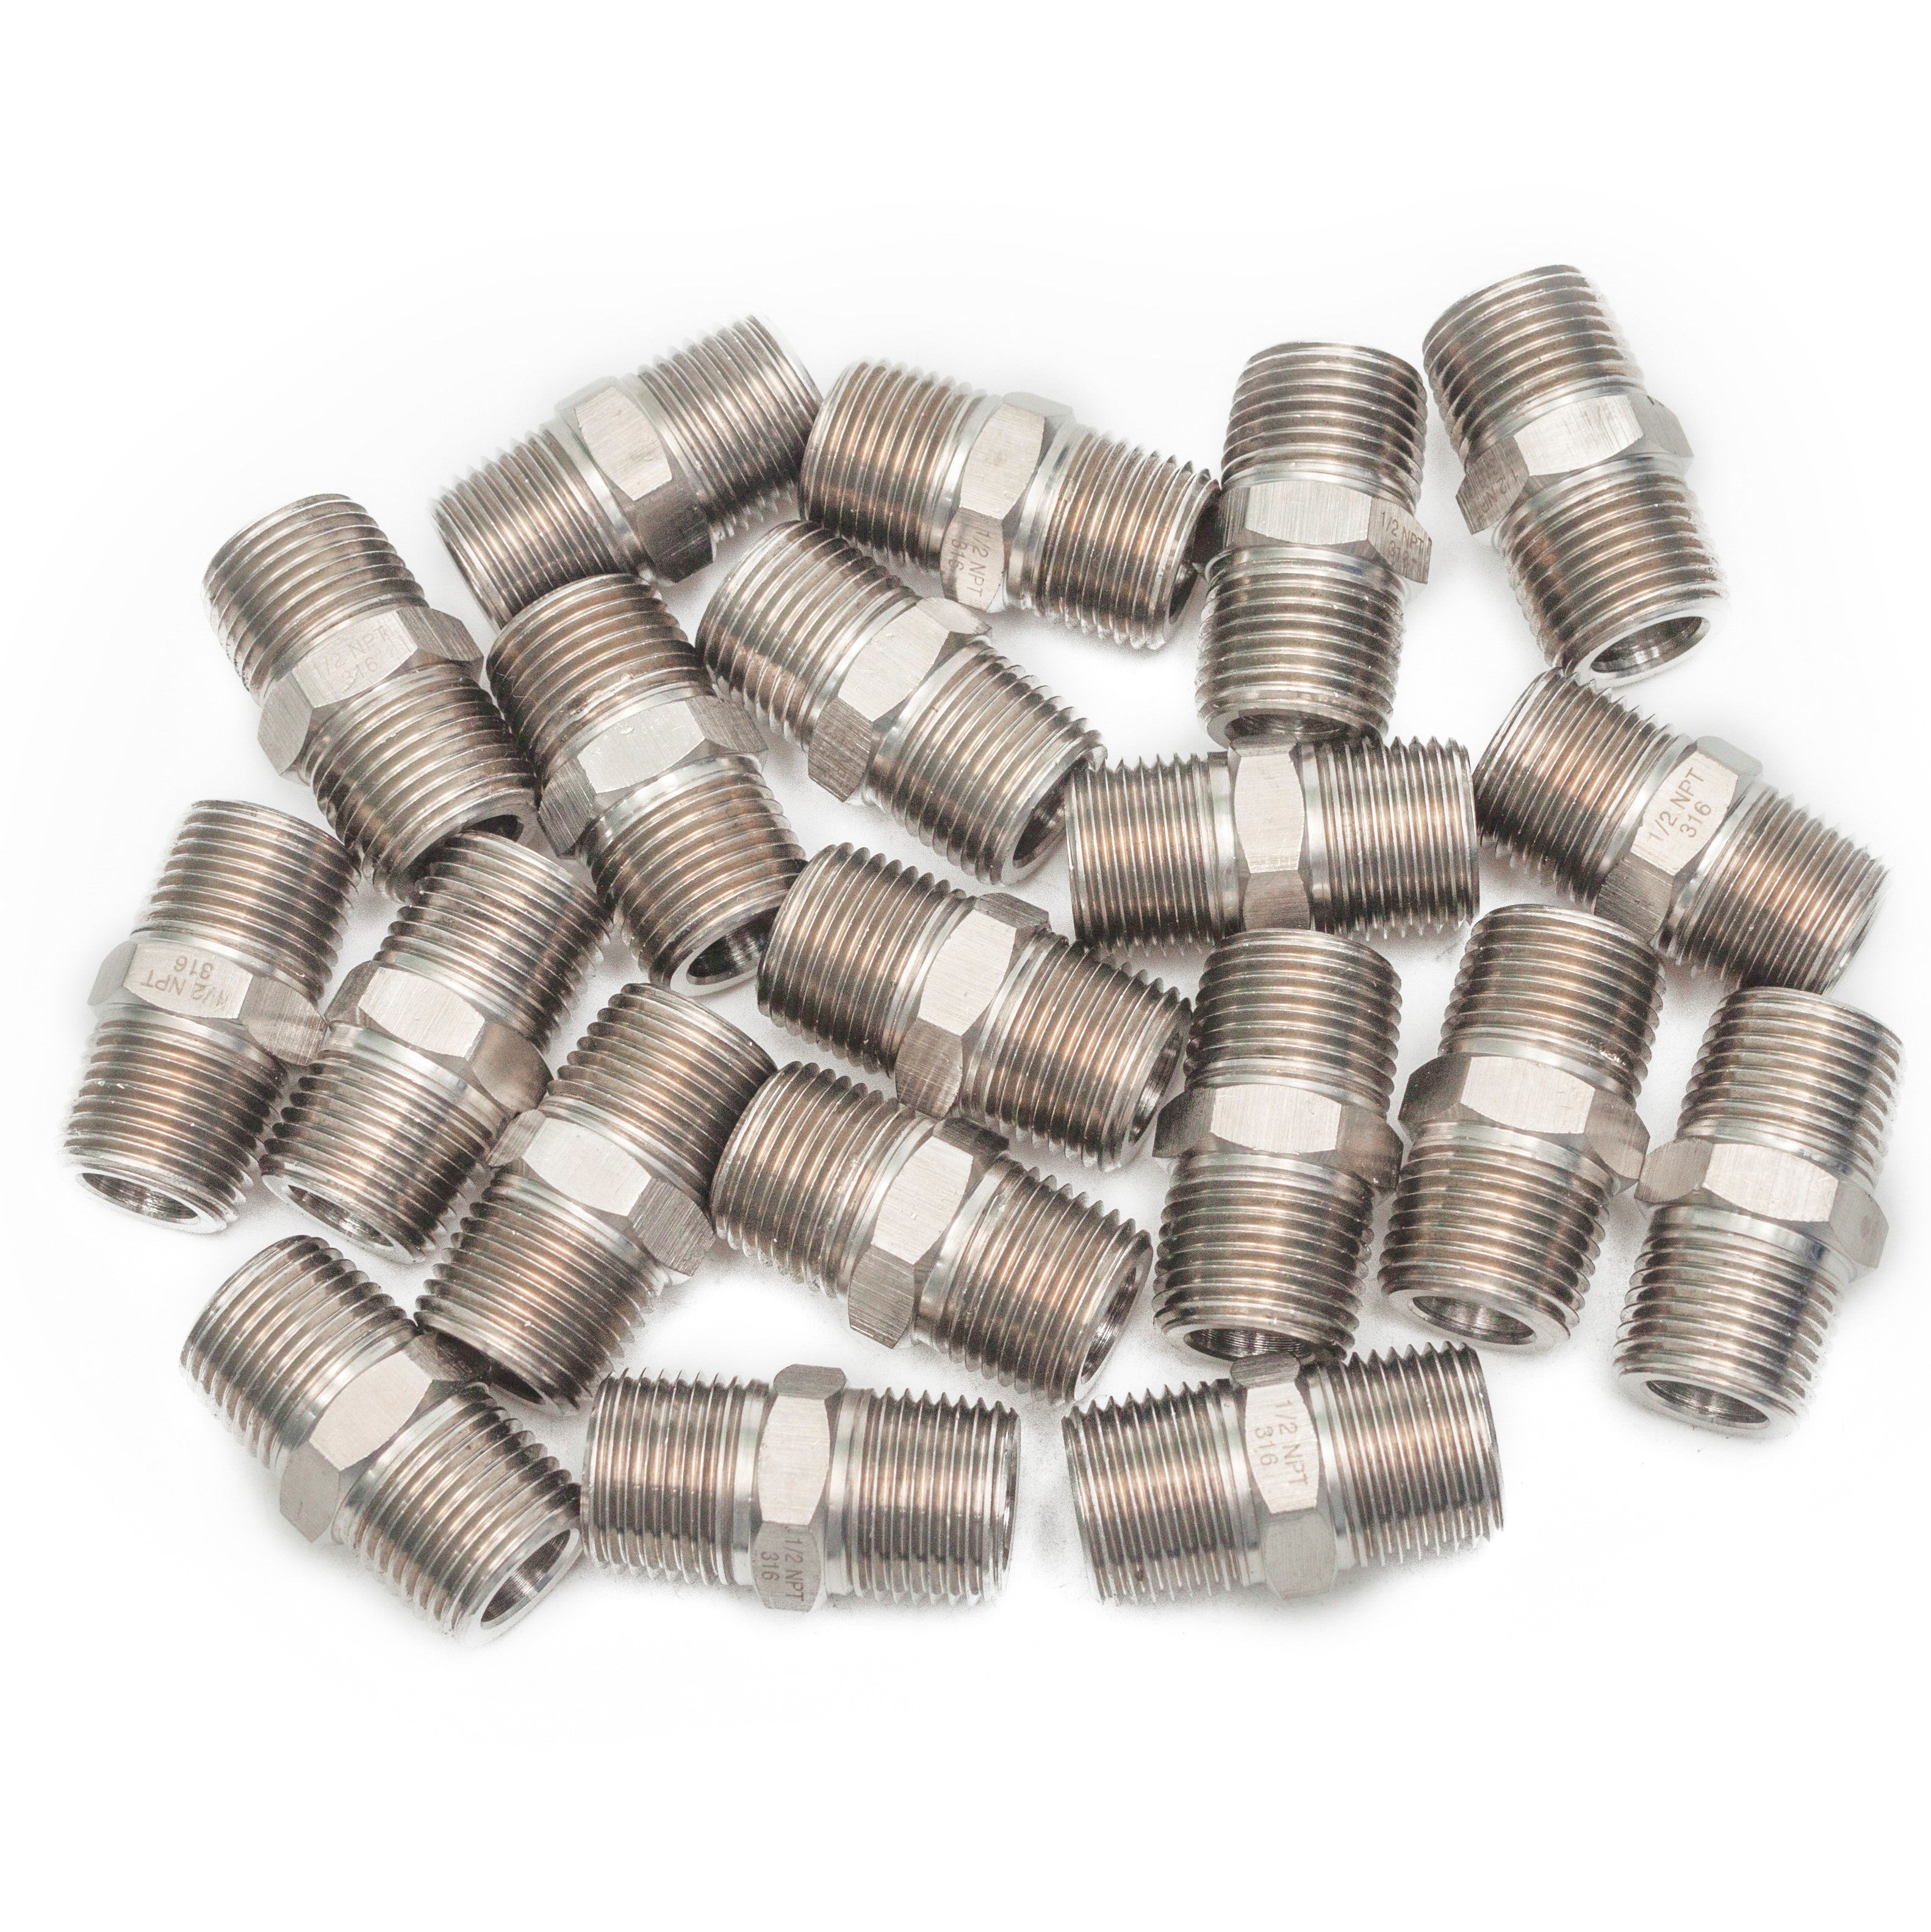 LTWFITTING Class 3000 Stainless Steel 316 Pipe Hex Nipple Fitting 1/2 Inch Male NPT Air Fuel Water (Pack of 20)